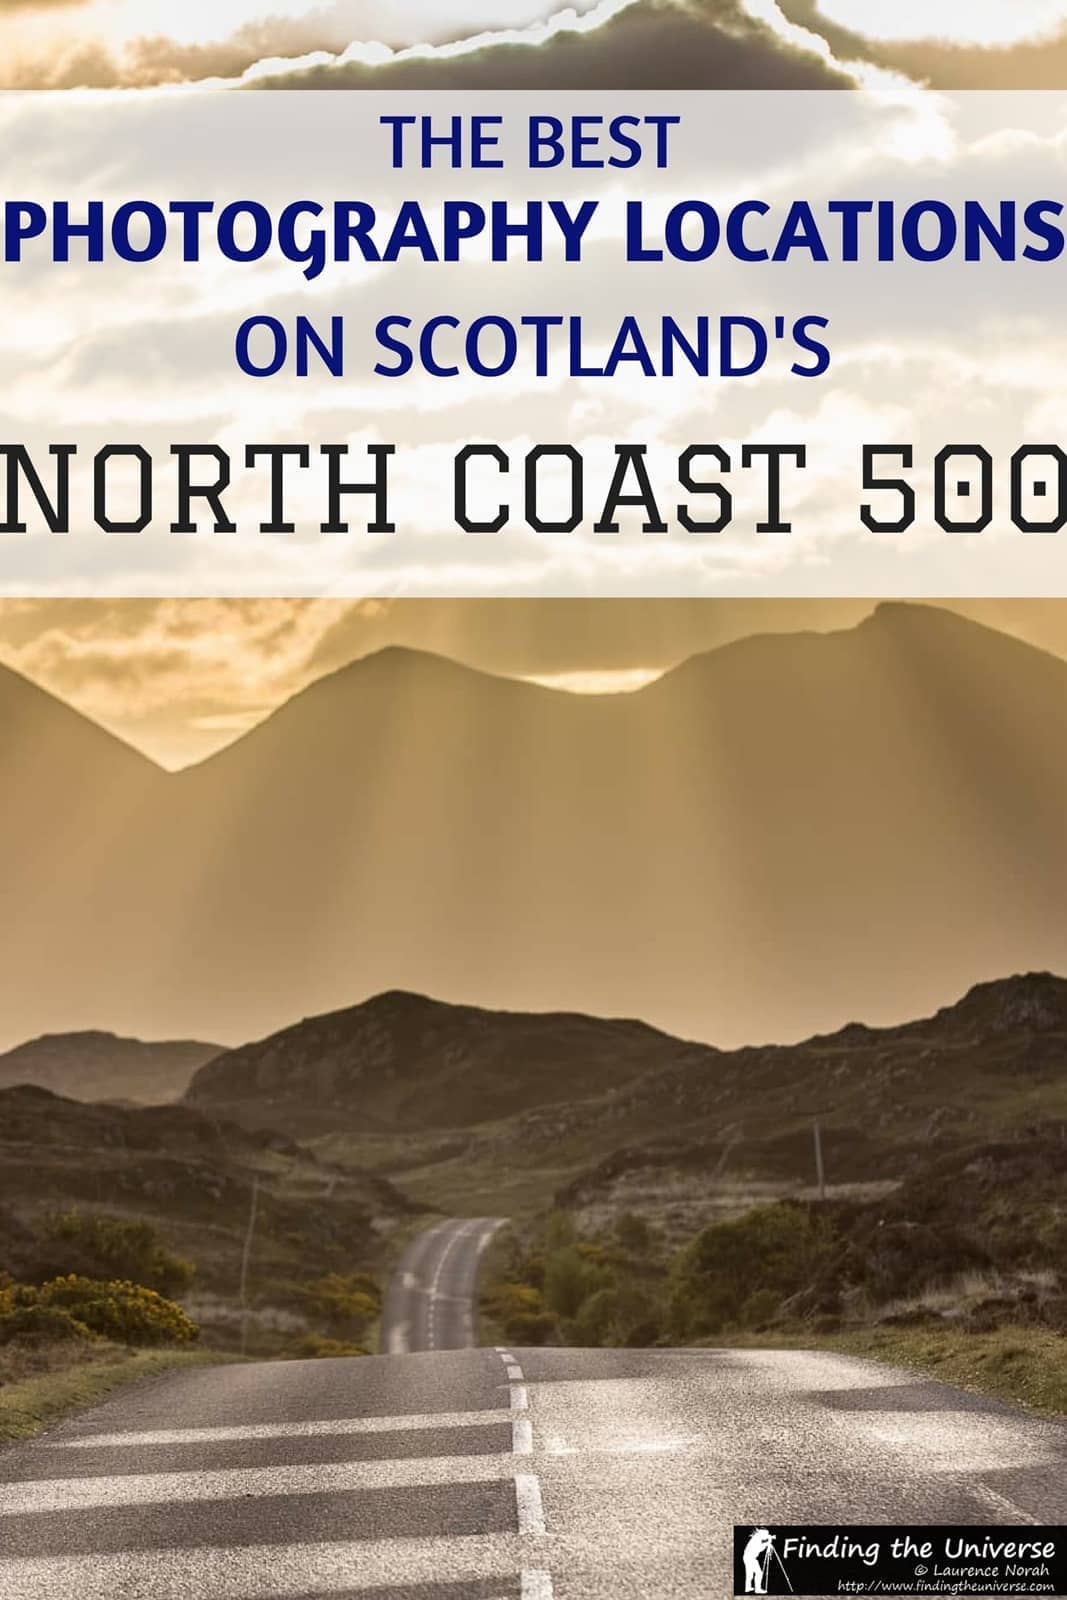 A guide to the best photography locations along Scotland's North Coast 500, including highland scenery, lochs, deer, highland coos, castles and more!